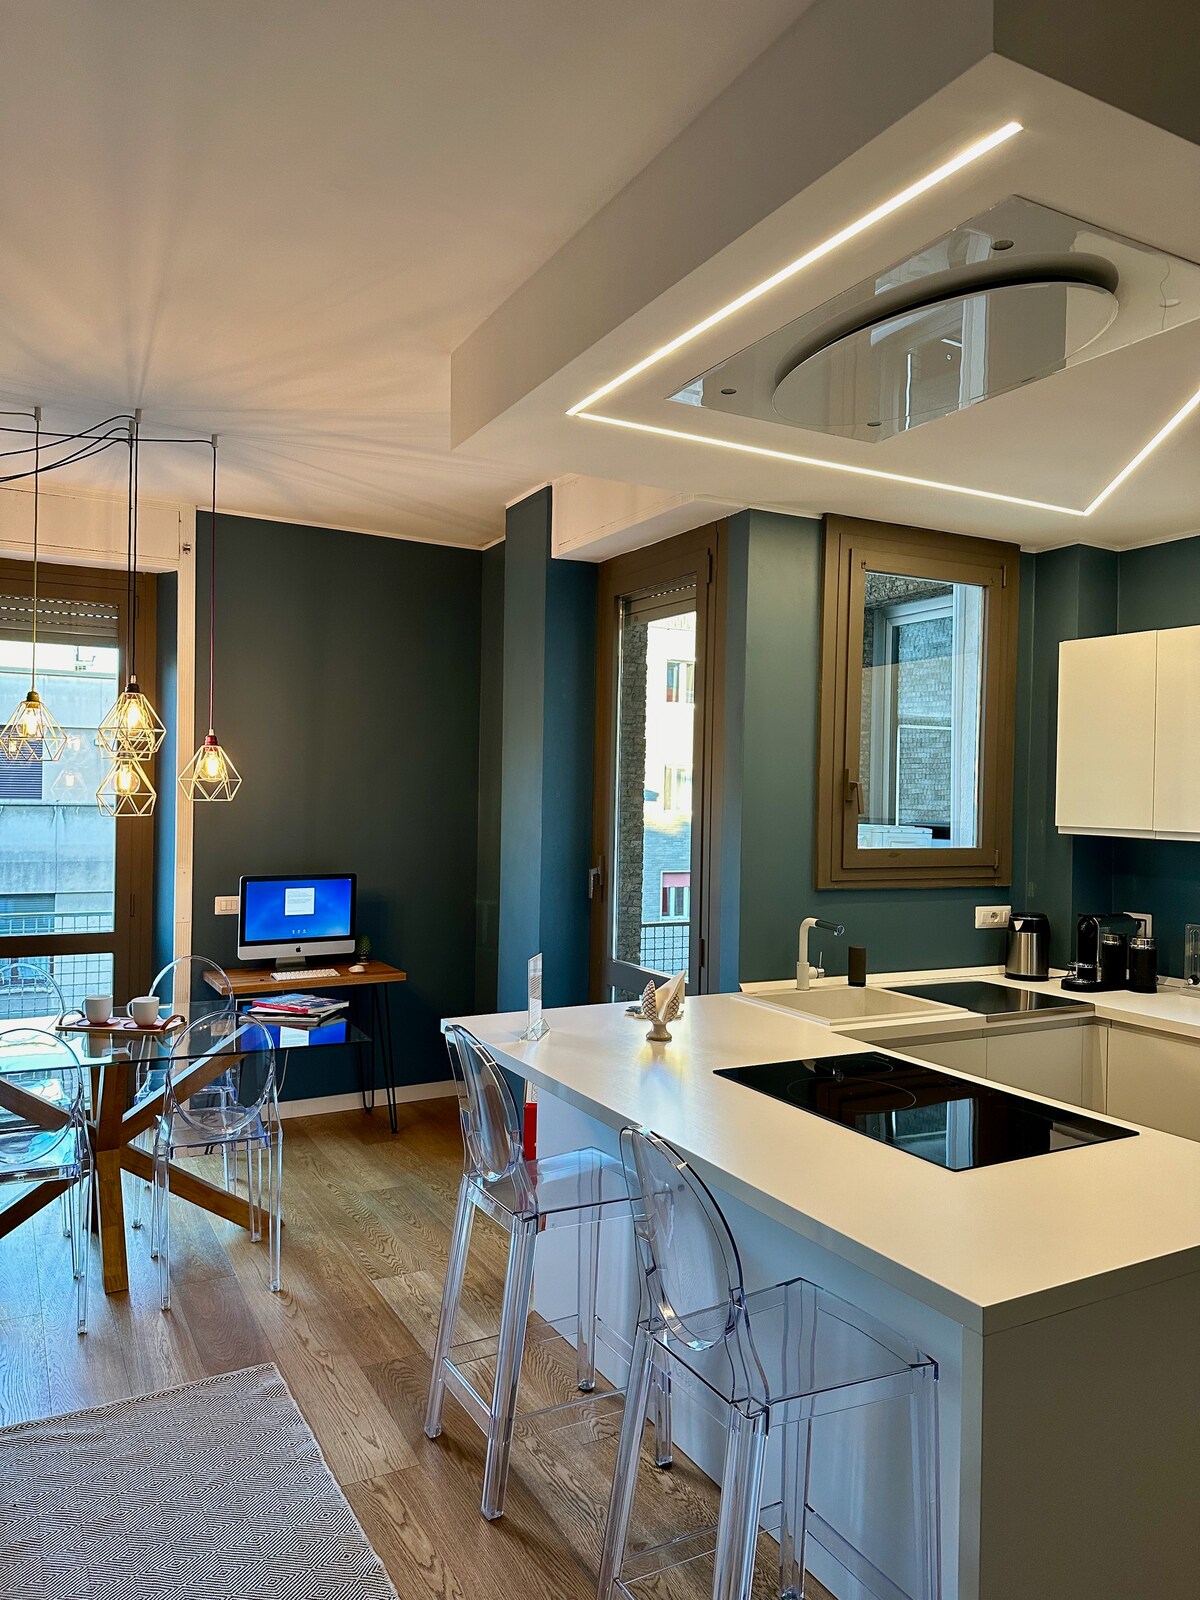 NoLo26Suite Apartment[10 min by subway from Duomo]